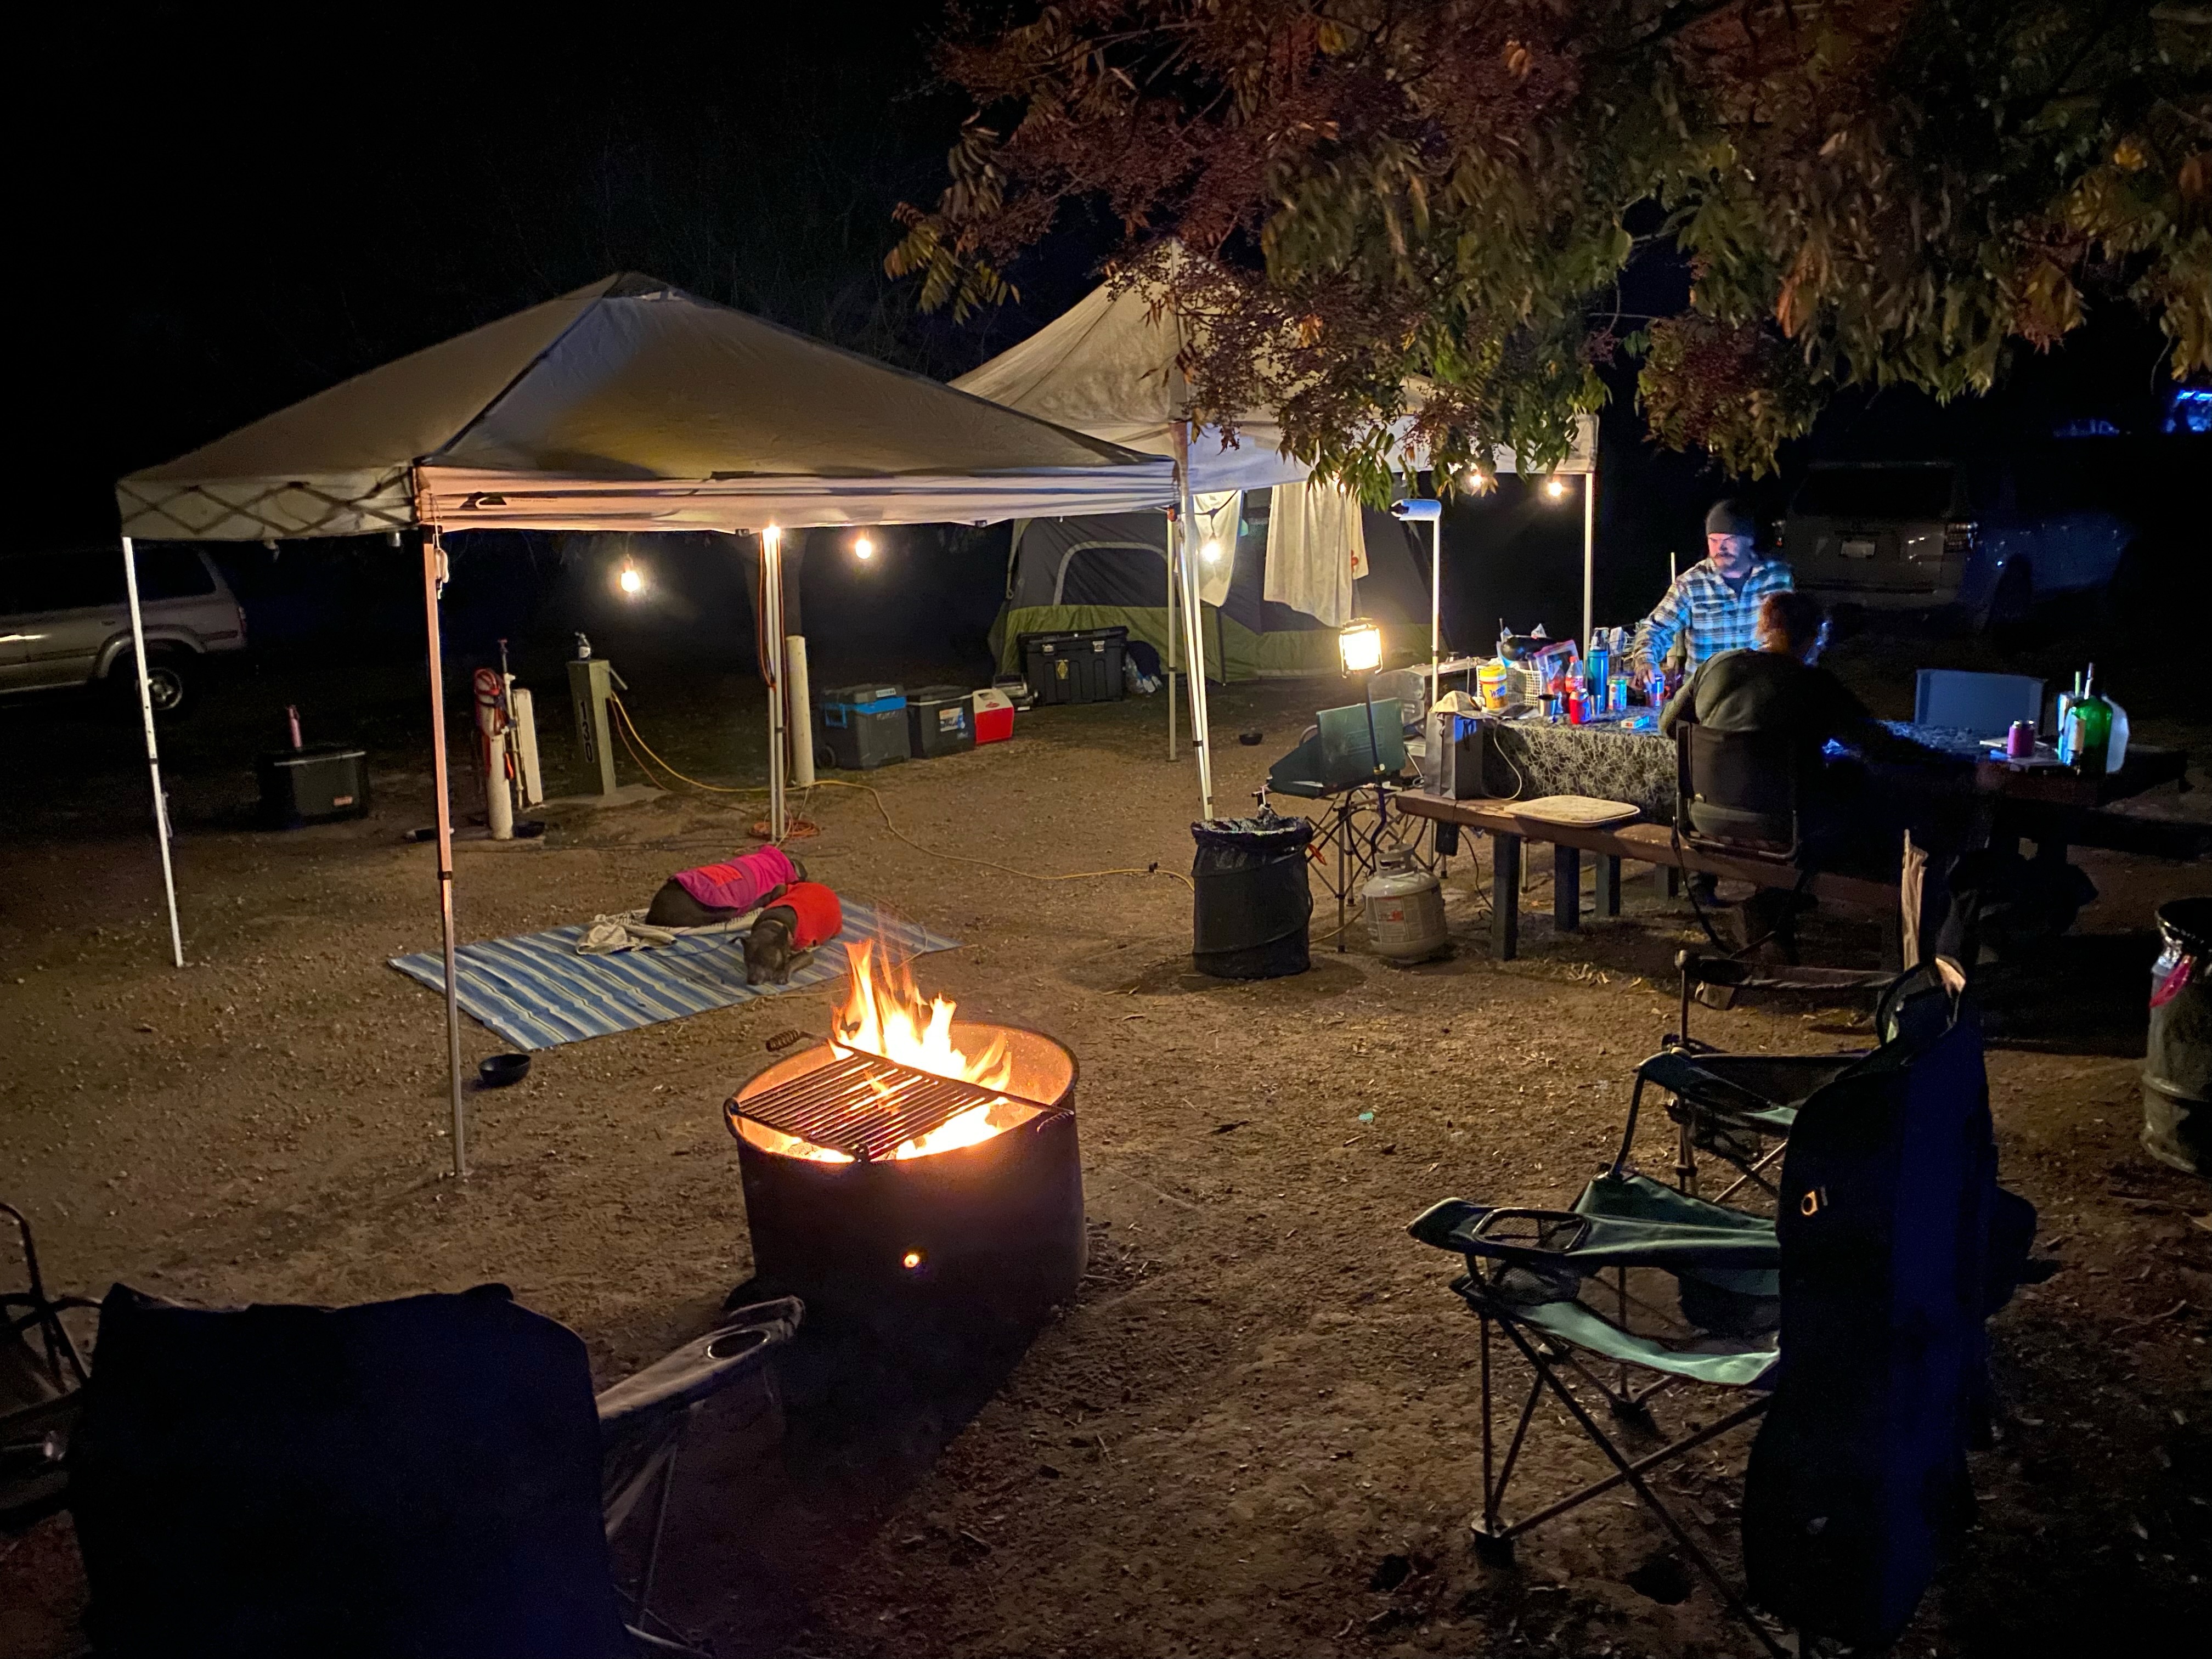 You can't camp without a campfire.